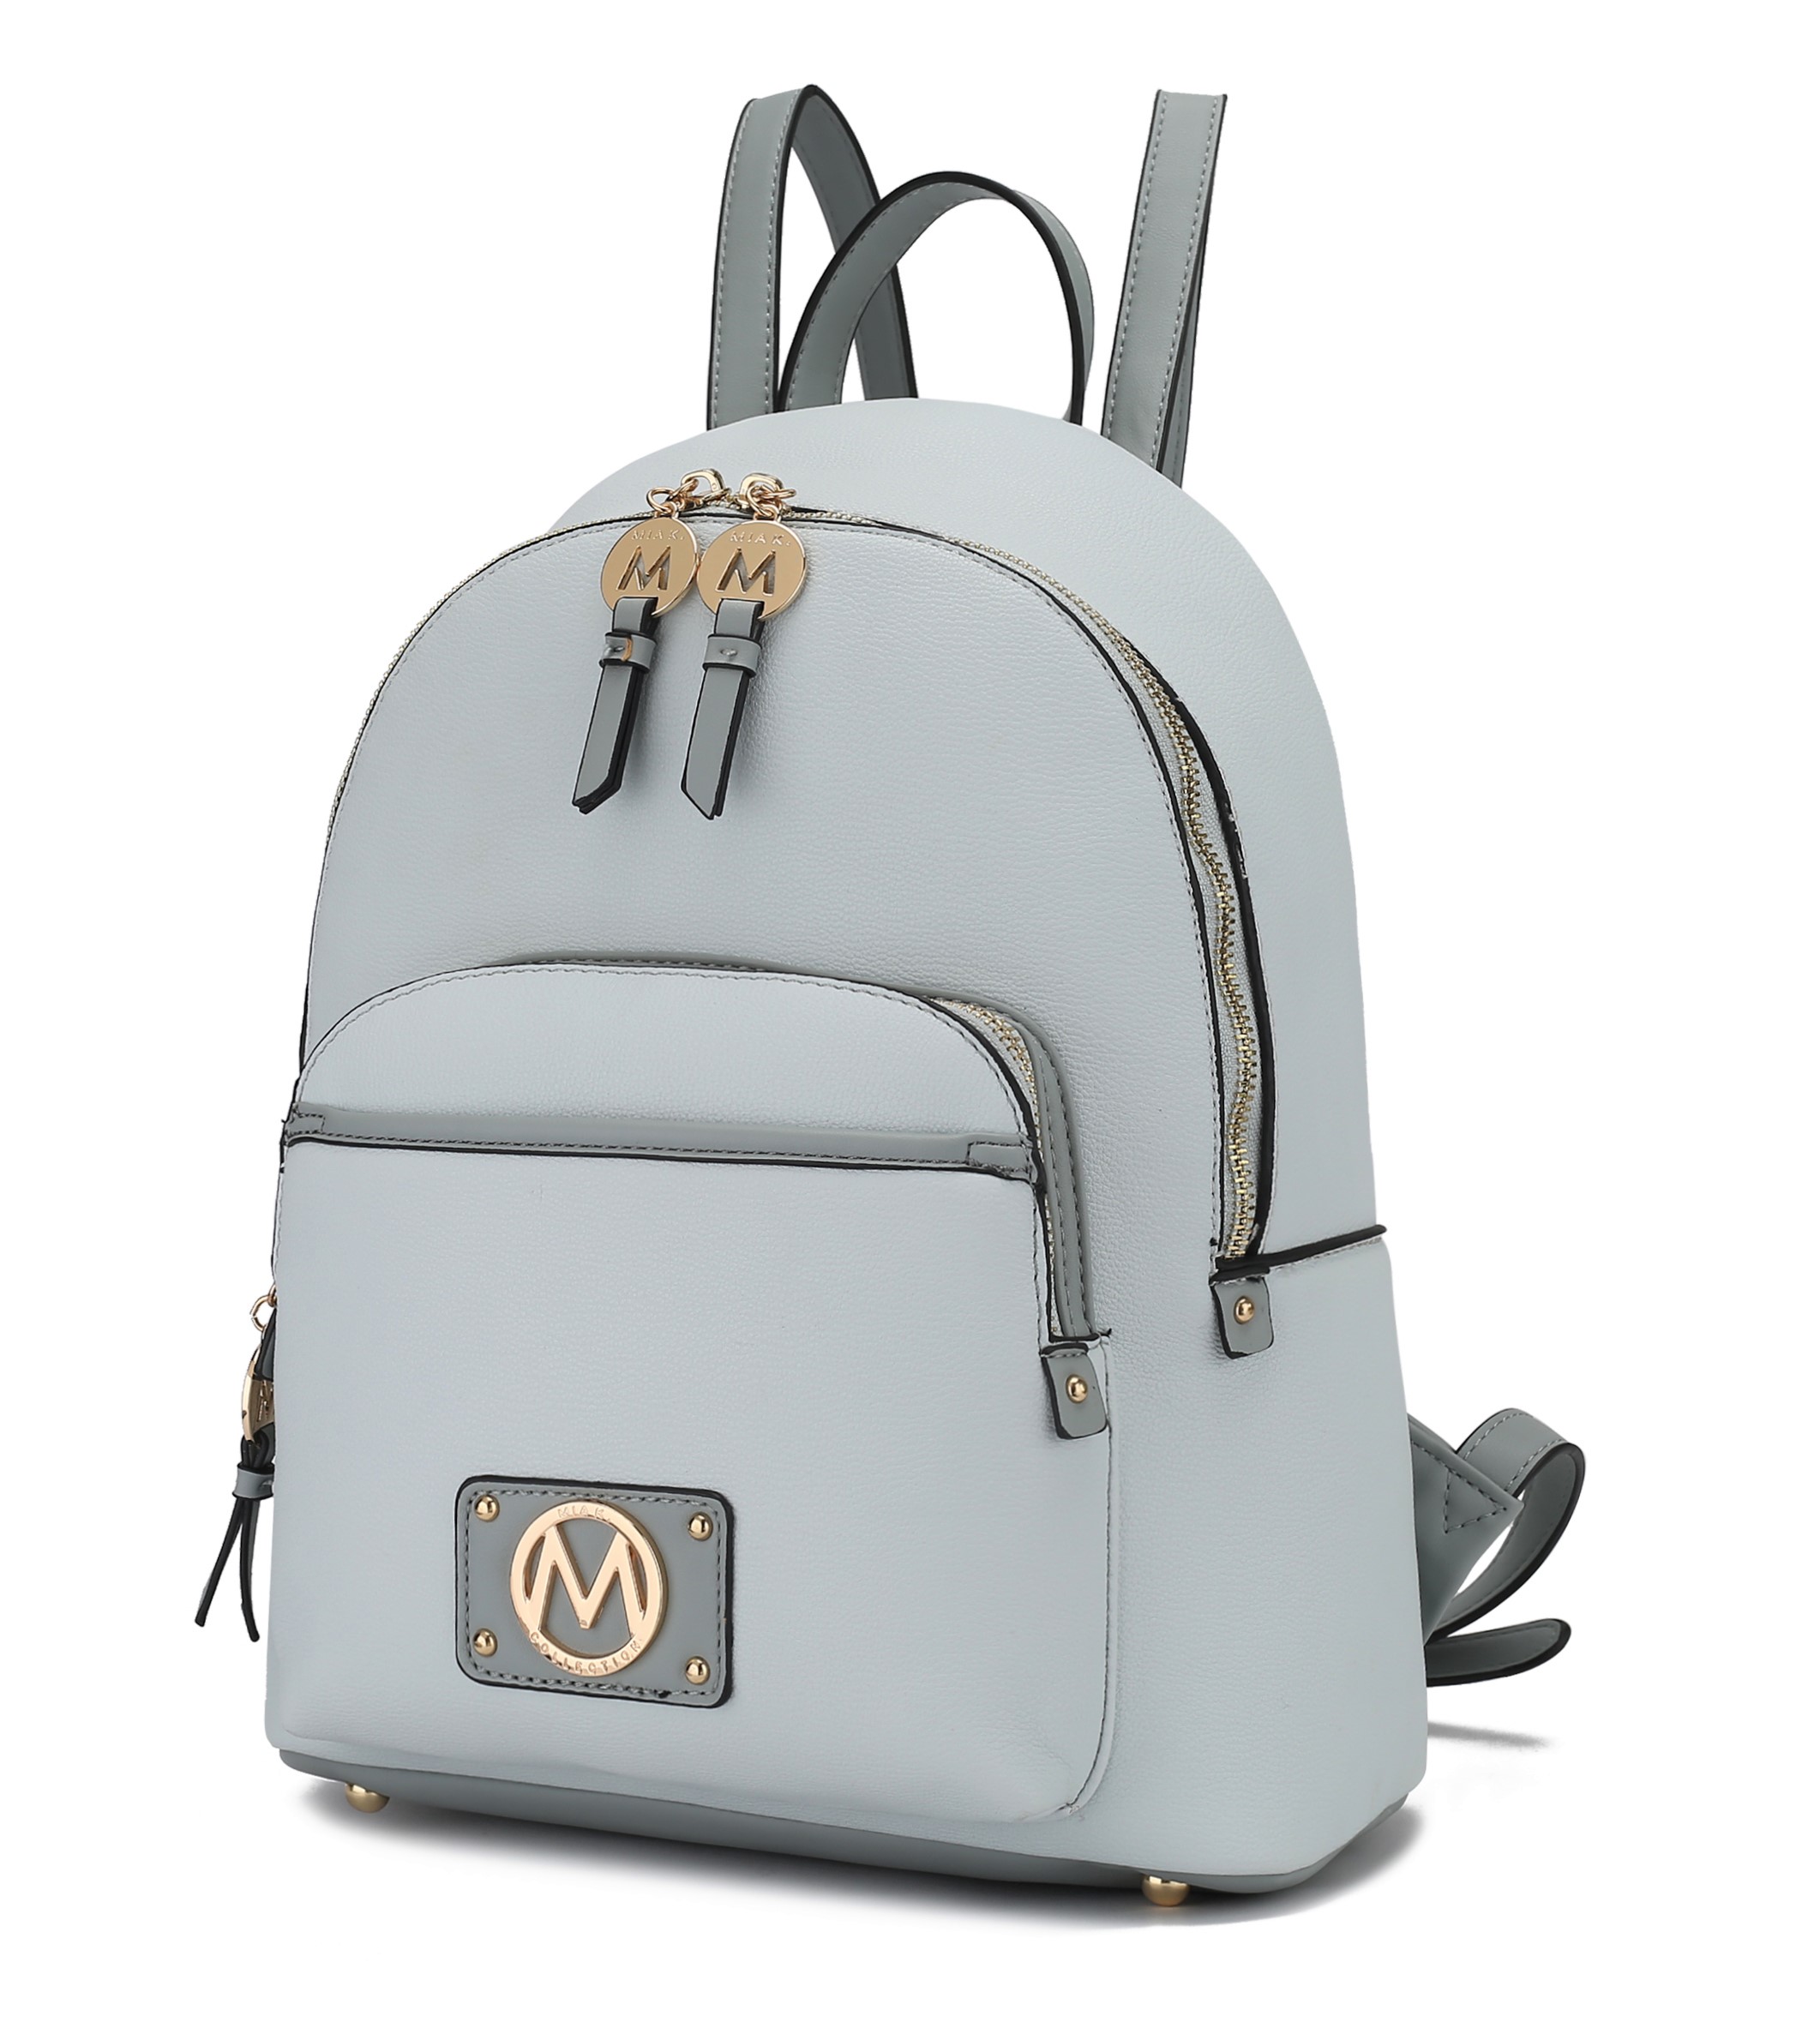 MKF Collection Alice Vegan Leather Women's Backpack by Mia k. - Light Blue - image 1 of 10